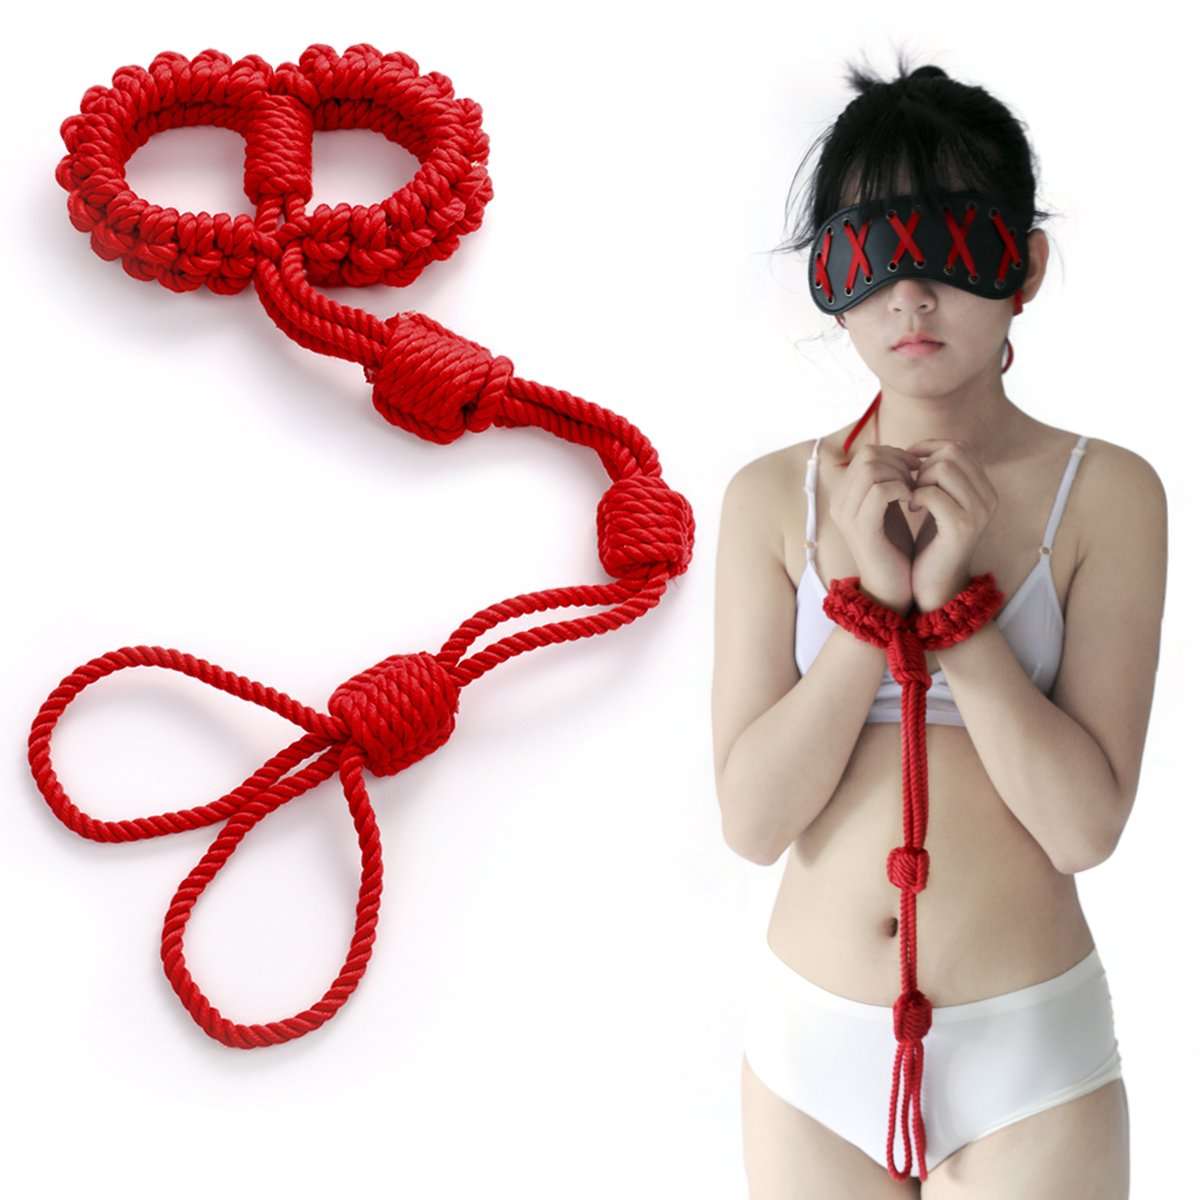 Become a Bondage Rope Master with Pre-Tied Rope Bondage? image picture